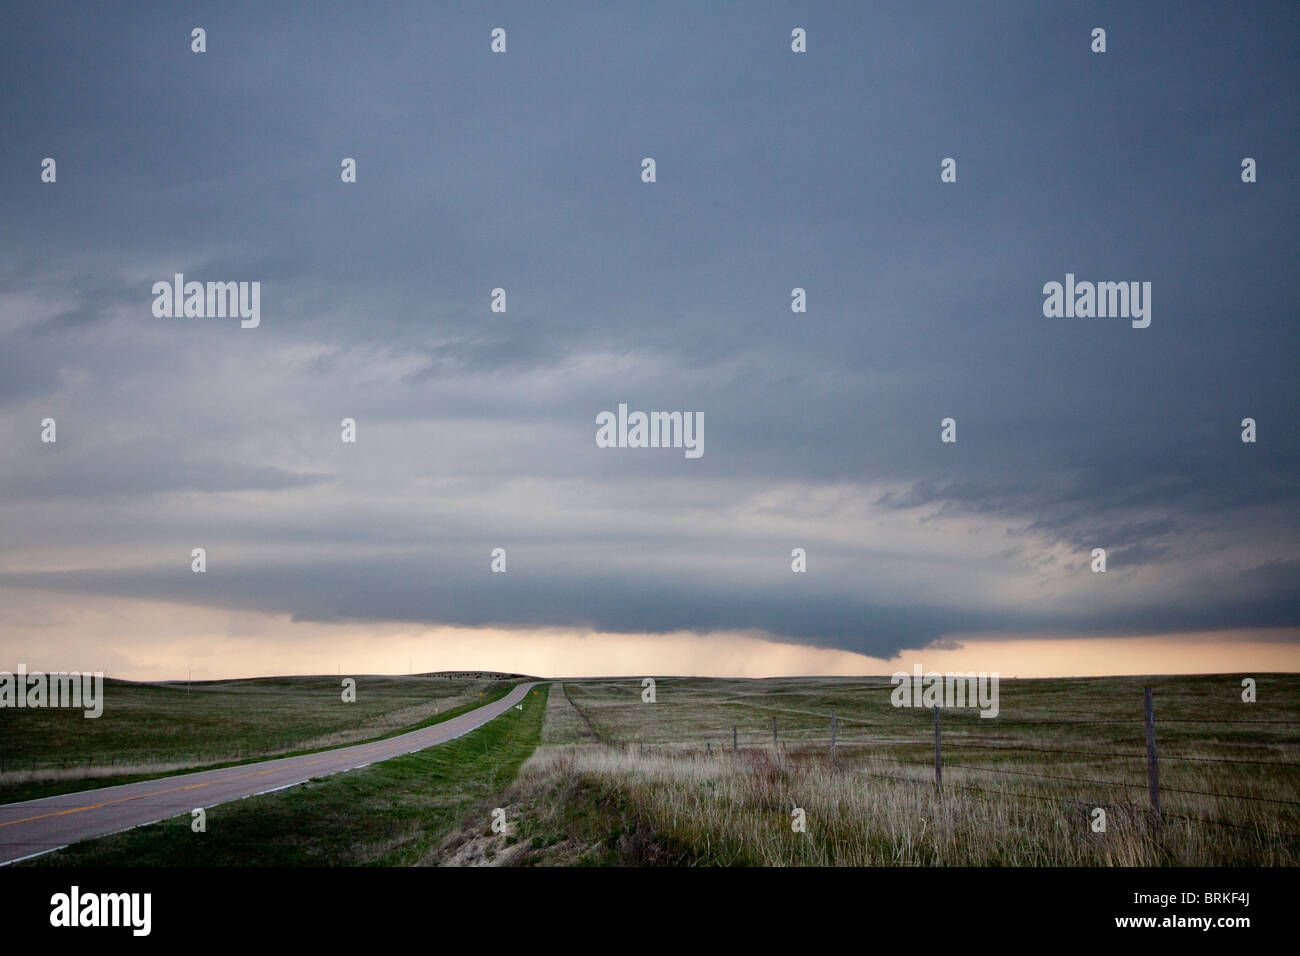 A supercellular thunderstorm in rural Wyoming, May 21, 2010. Stock Photo